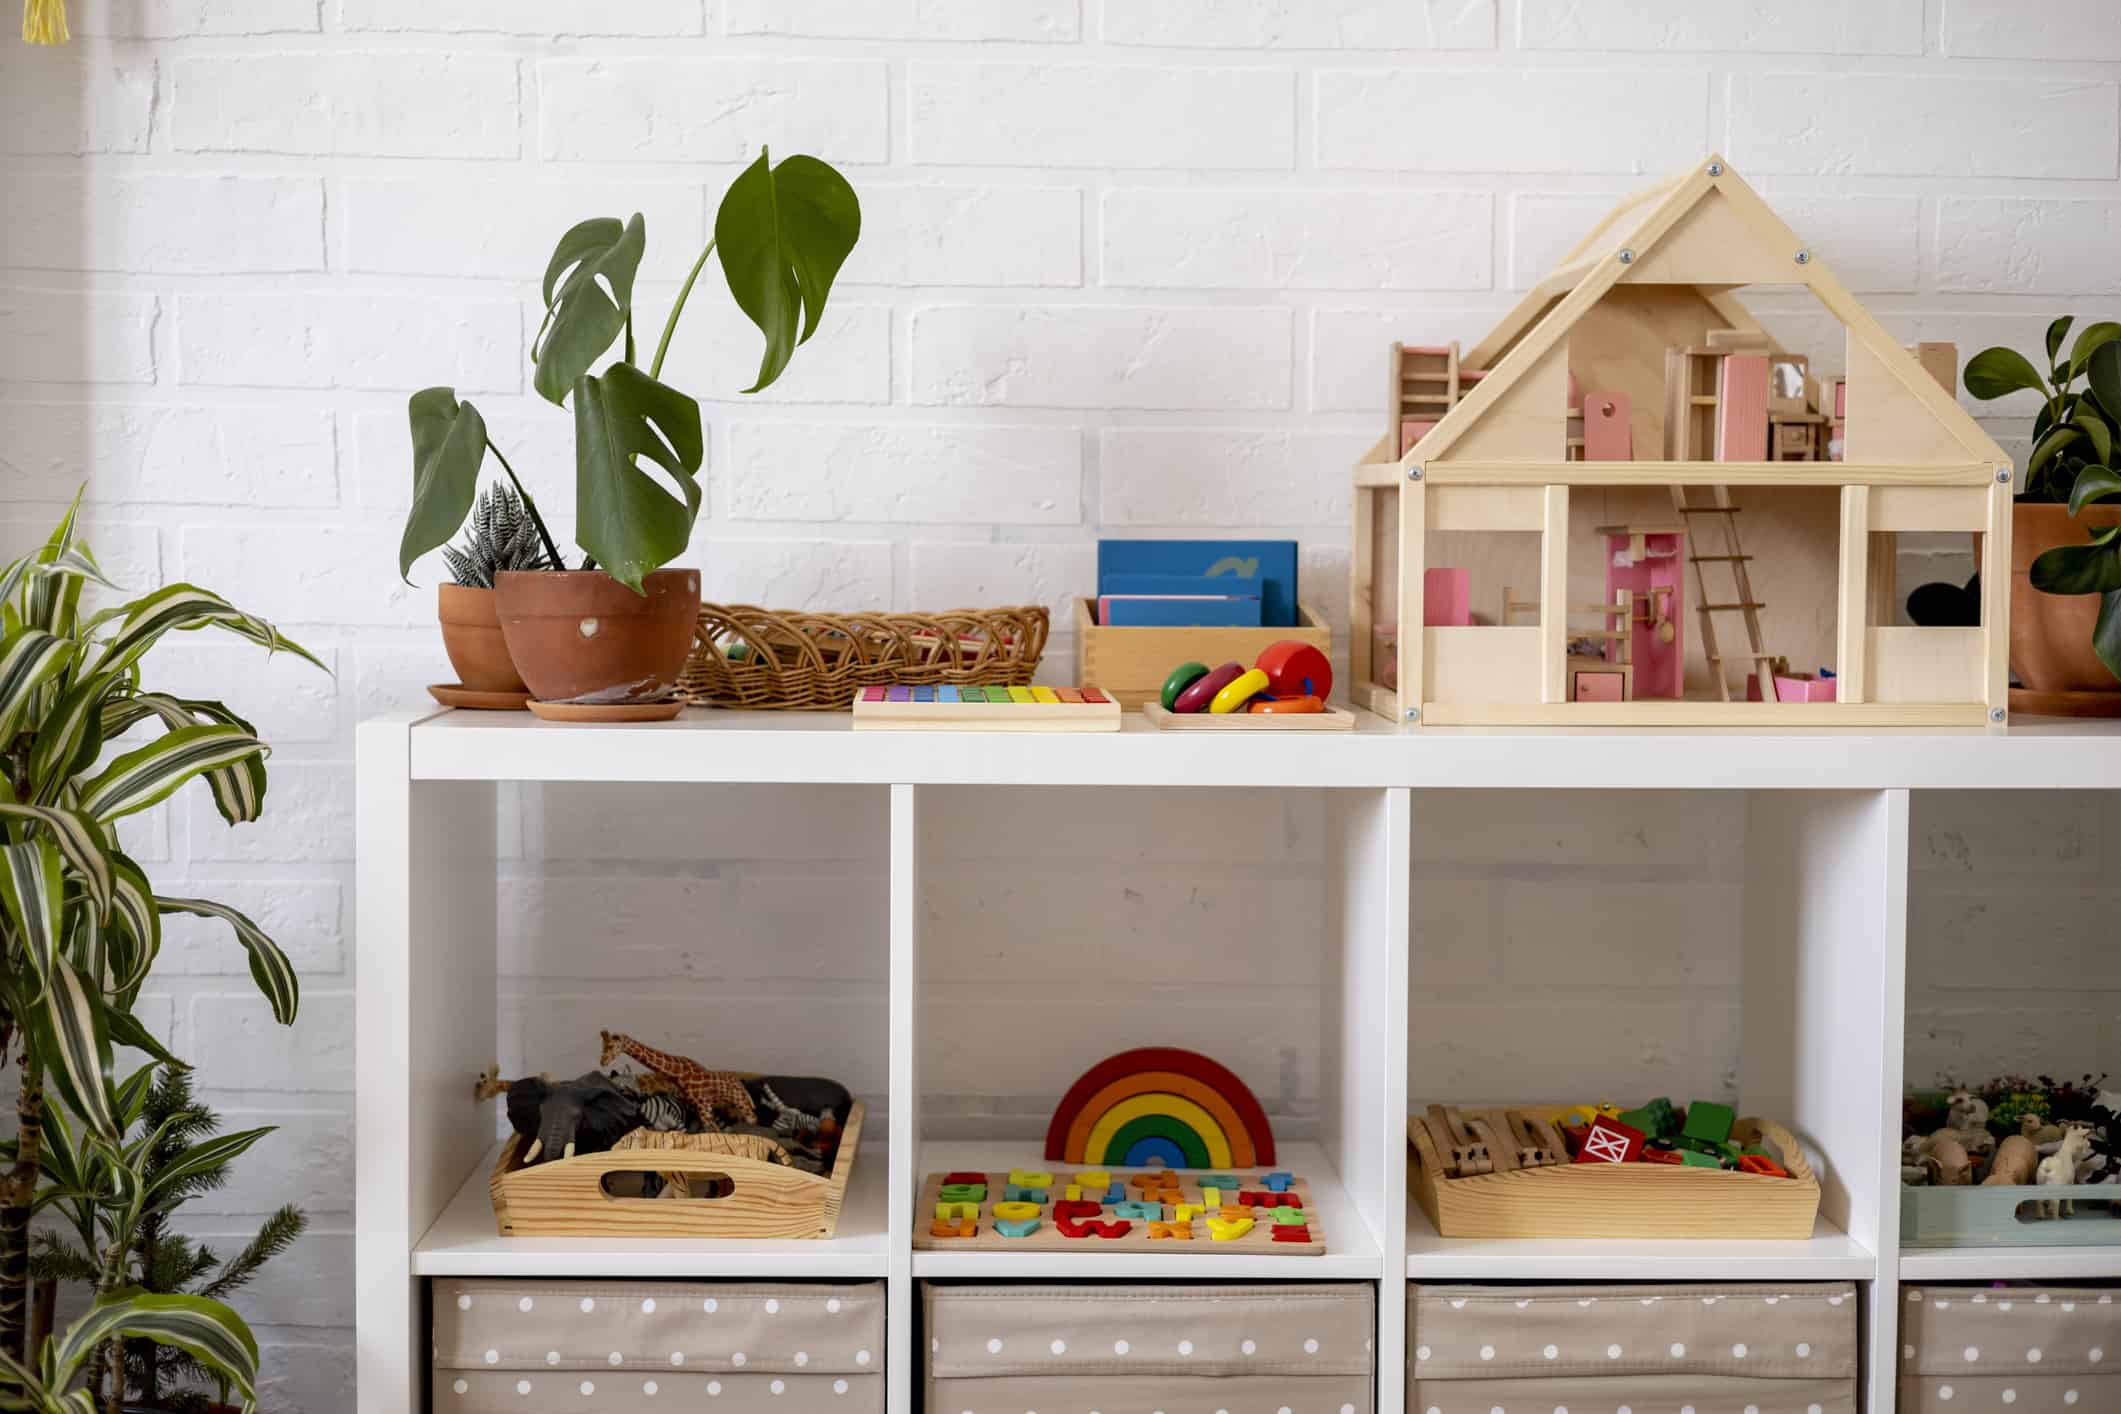 Montessori material. White shelves in a room with neatly arranged toys.